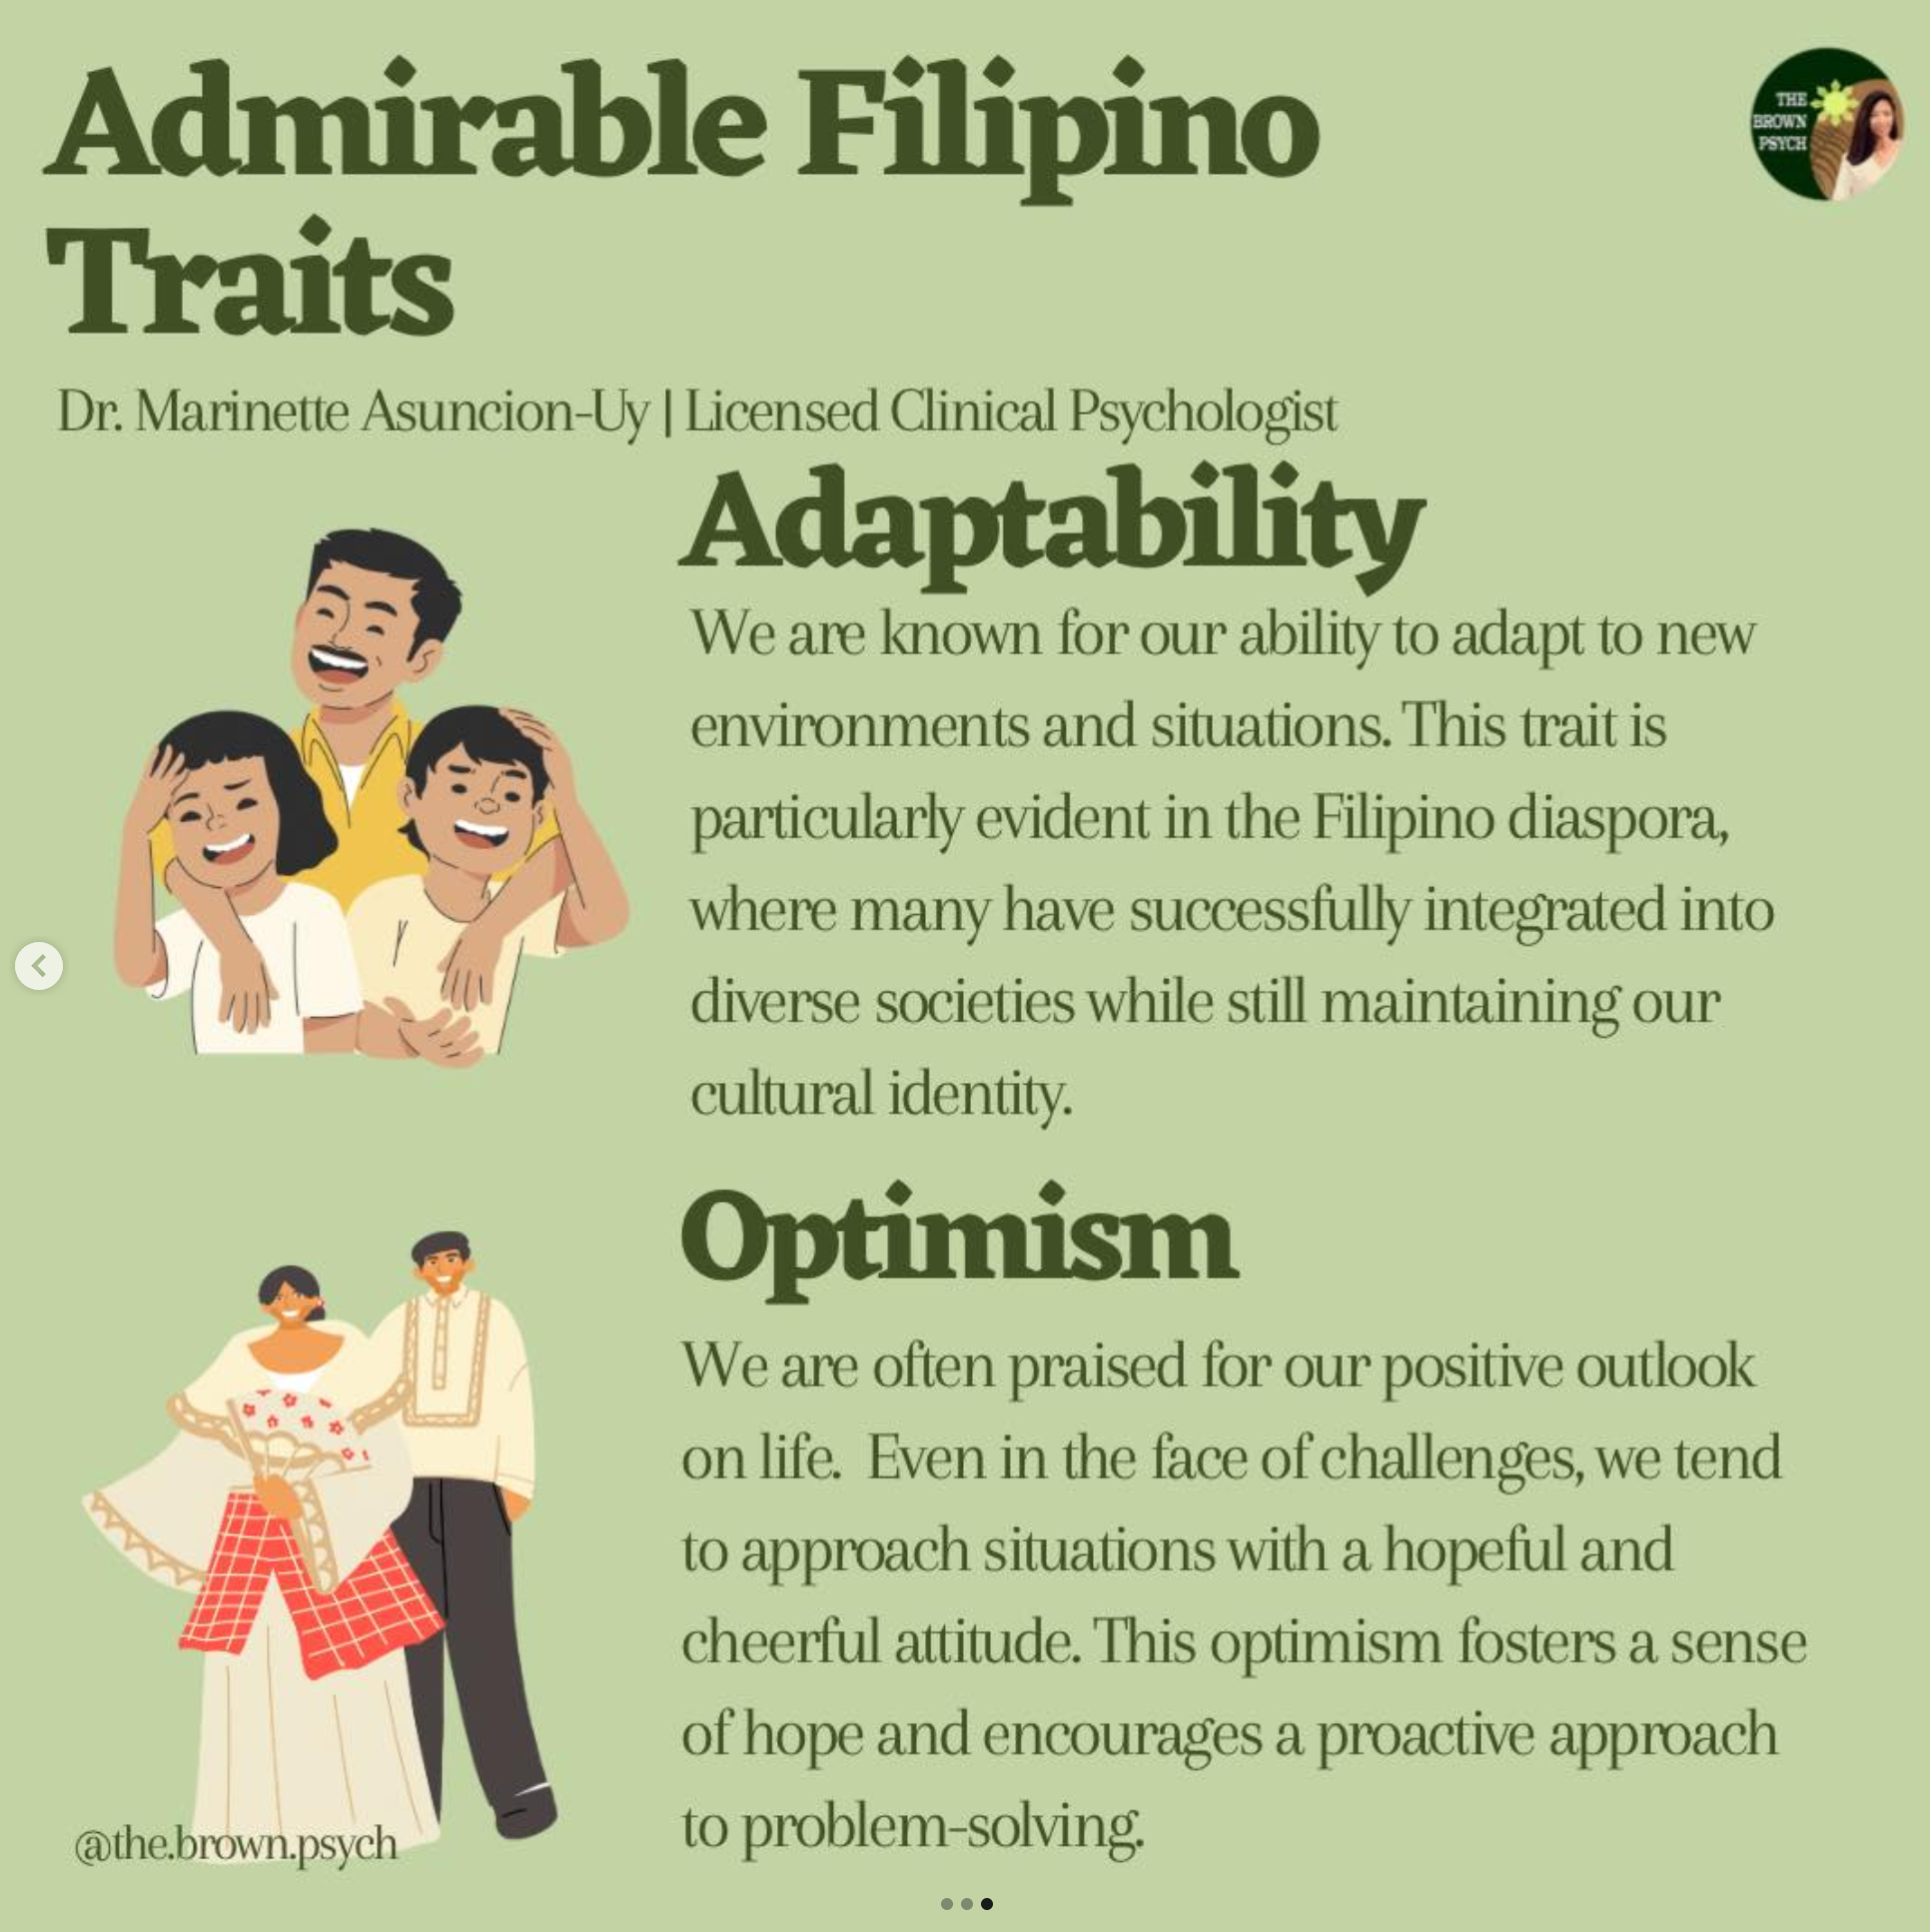 Admirable Filipino
&10;THE
&10;BROWN
&10;PSYCH
&10;Traits
&10;Dr. Marinette Asuncion-Uy | Licensed Clinical Psychologist
&10;Adaptability
&10;We are known for our ability to adapt to new environments and situations. This trait is particularly evident in the Filipino diaspora, where many have successfully integrated into diverse societies while still maintaining our cultural identity.
&10;Optimism
&10;We are often praised for our positive outlook on life. Even in the face of challenges, we tend to approach situations with a hopeful and cheerful attitude. This optimism fosters a sense of hope and encourages a proactive approach
&10;@the.brown.psych
&10;to problem-solving.